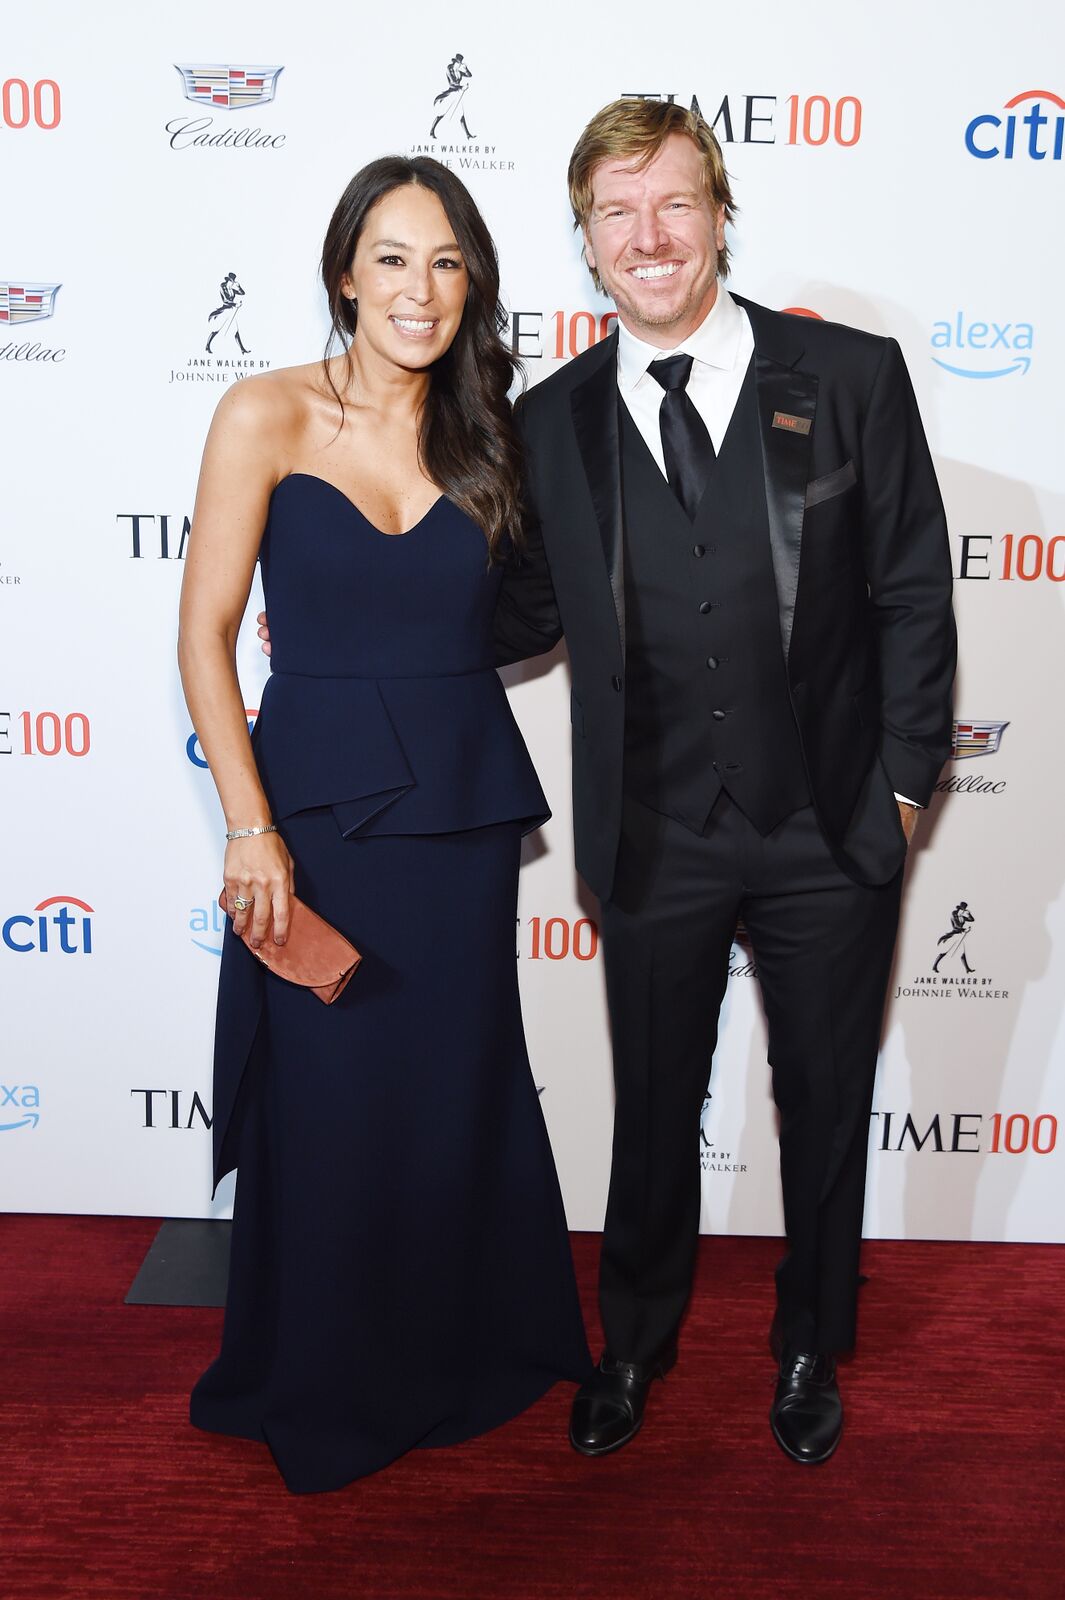 Joanna Gaines and Chip Gaines attend the TIME 100 Gala 2019 Cocktails at Jazz at Lincoln Center on April 23, 2019 in New York City | Photo: Getty Images